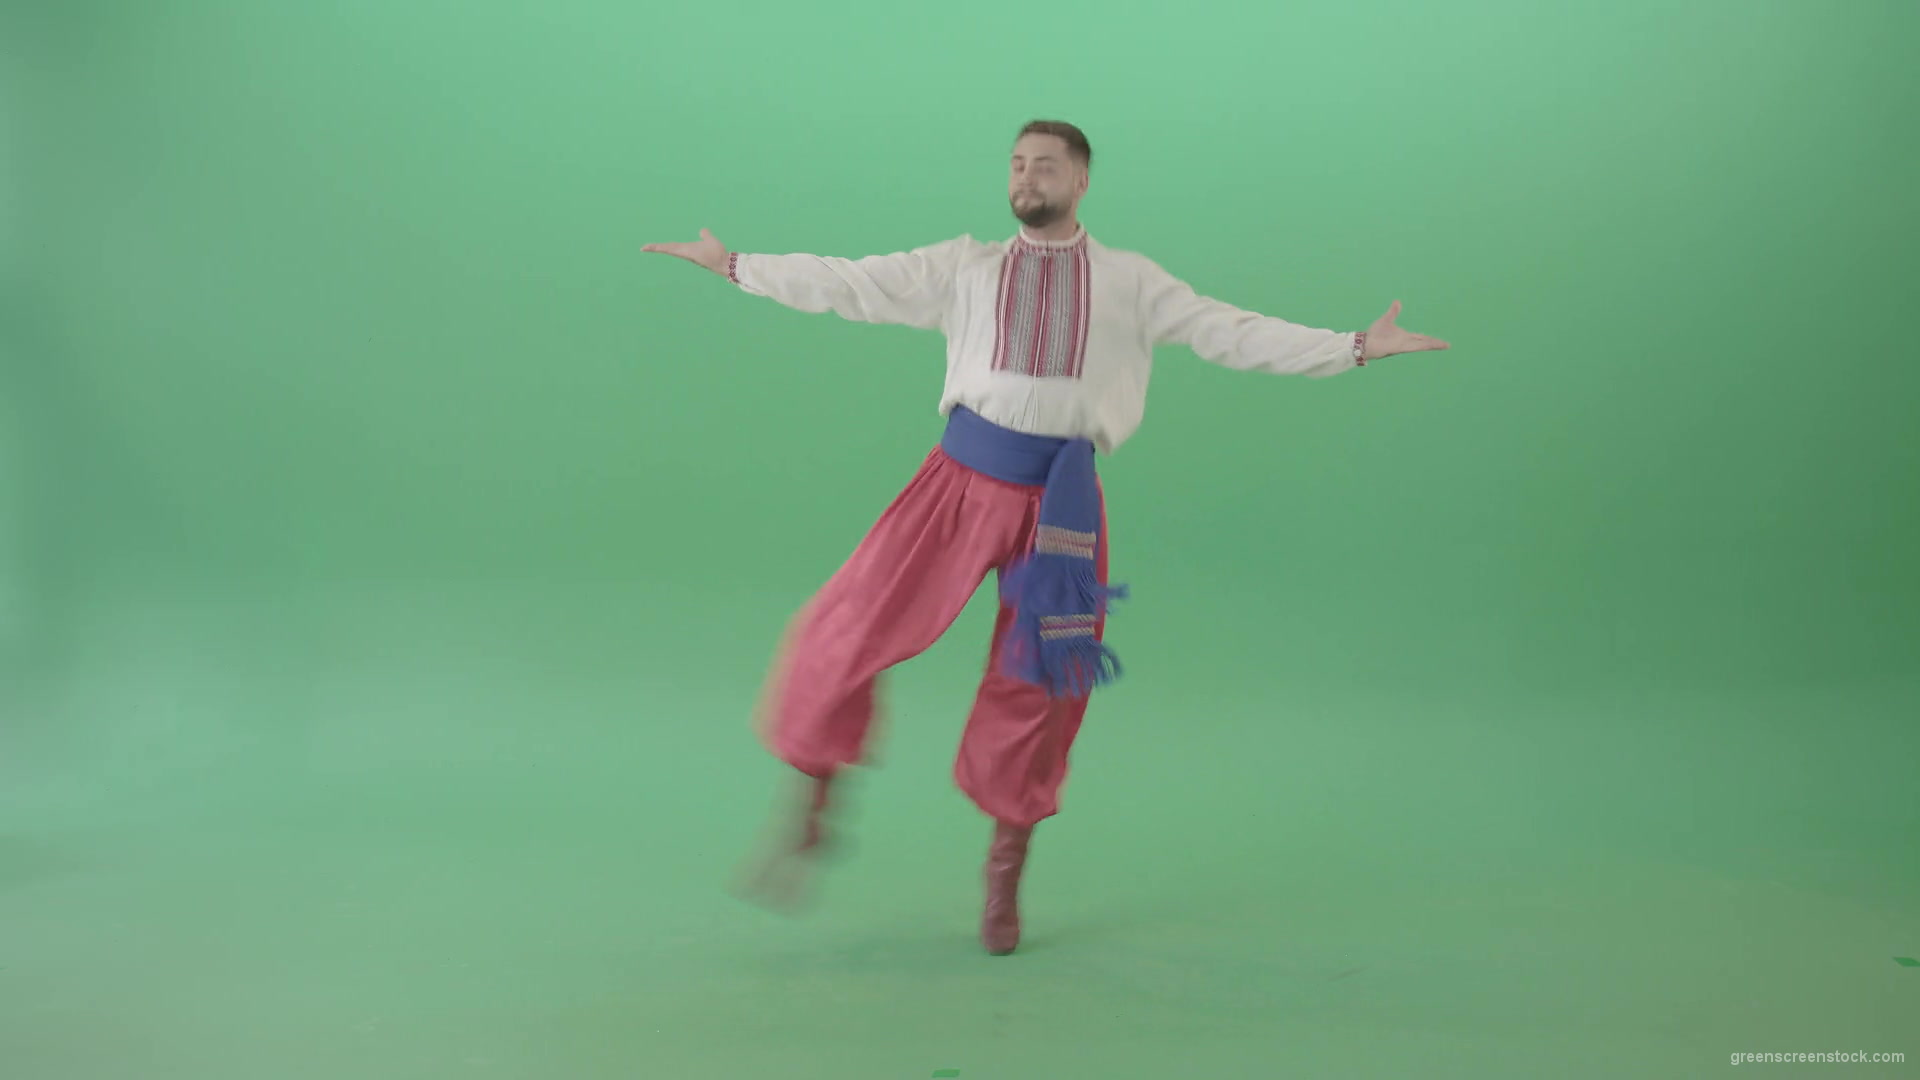 Slavic-Ukraine-folk-dance-by-UA-Cossack-man-jumping-isolated-on-Green-Background-4K-Video-Footage-1920_006 Green Screen Stock